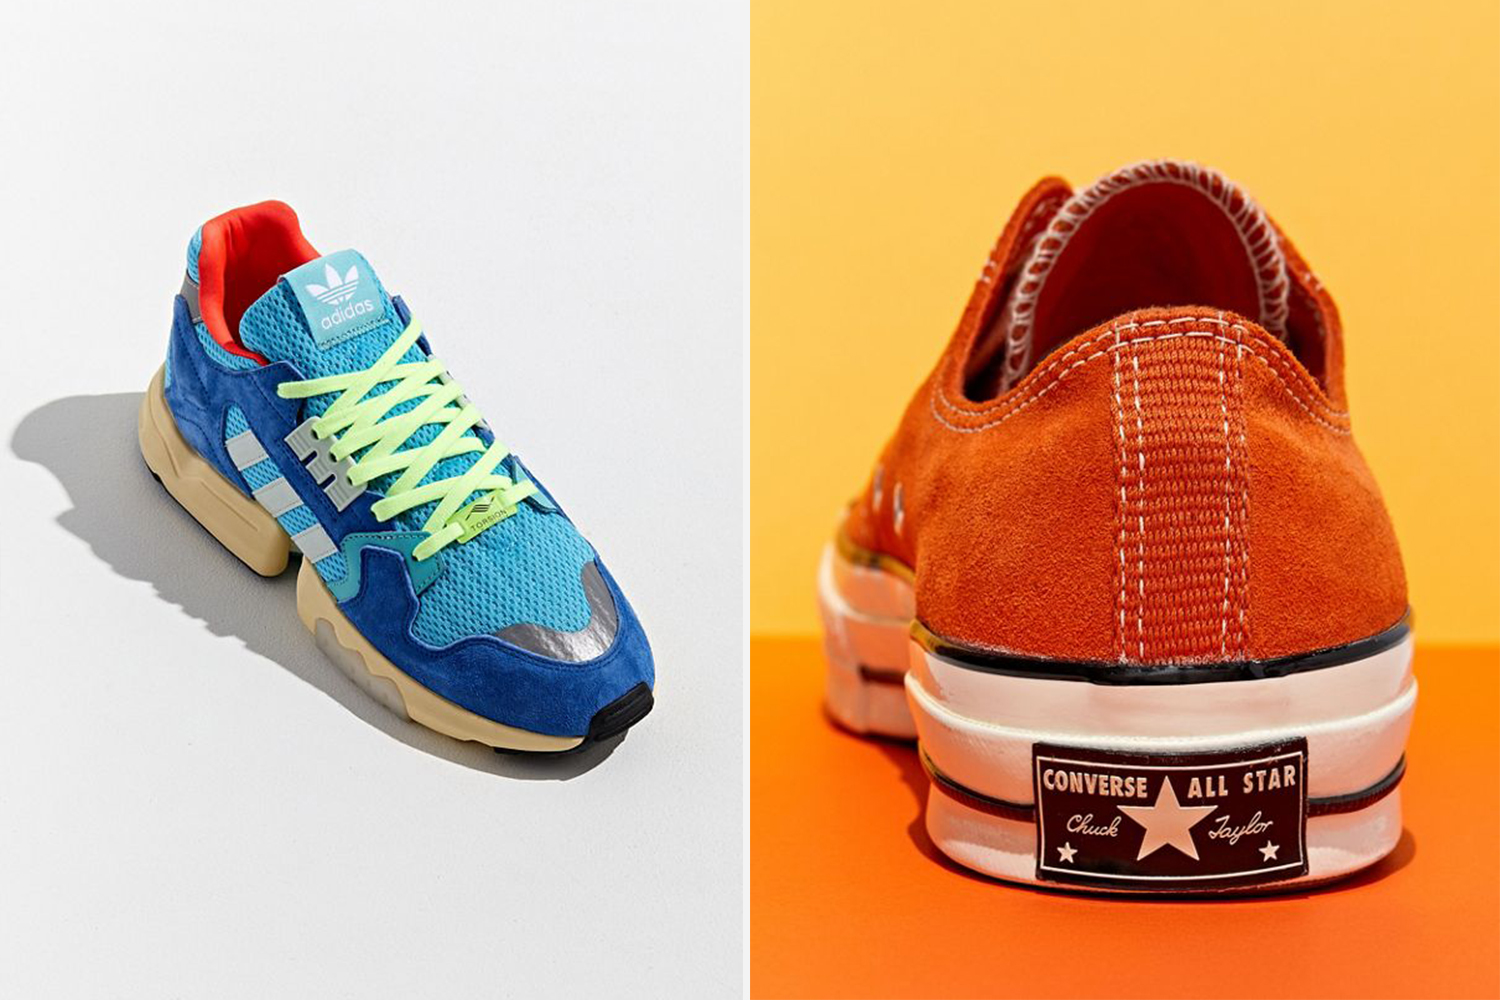 Take 50% Off Adidas, Converse Sneakers at Urban Outfitters - InsideHook